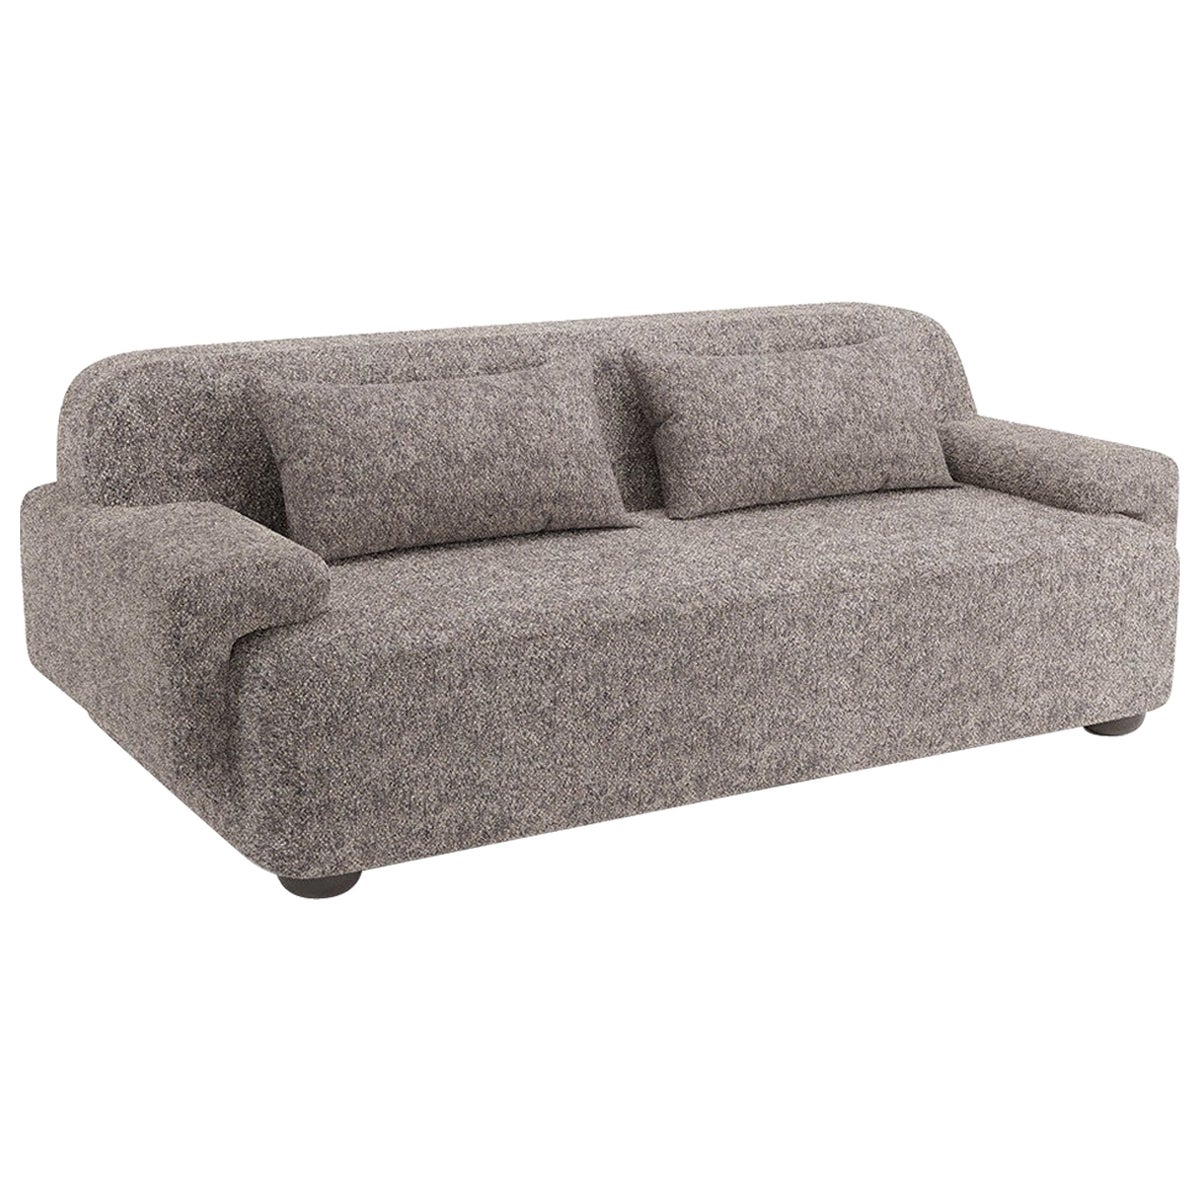 Popus Editions Lena 4 Seater Sofa in Anthracite Antwerp Linen Upholstery For Sale